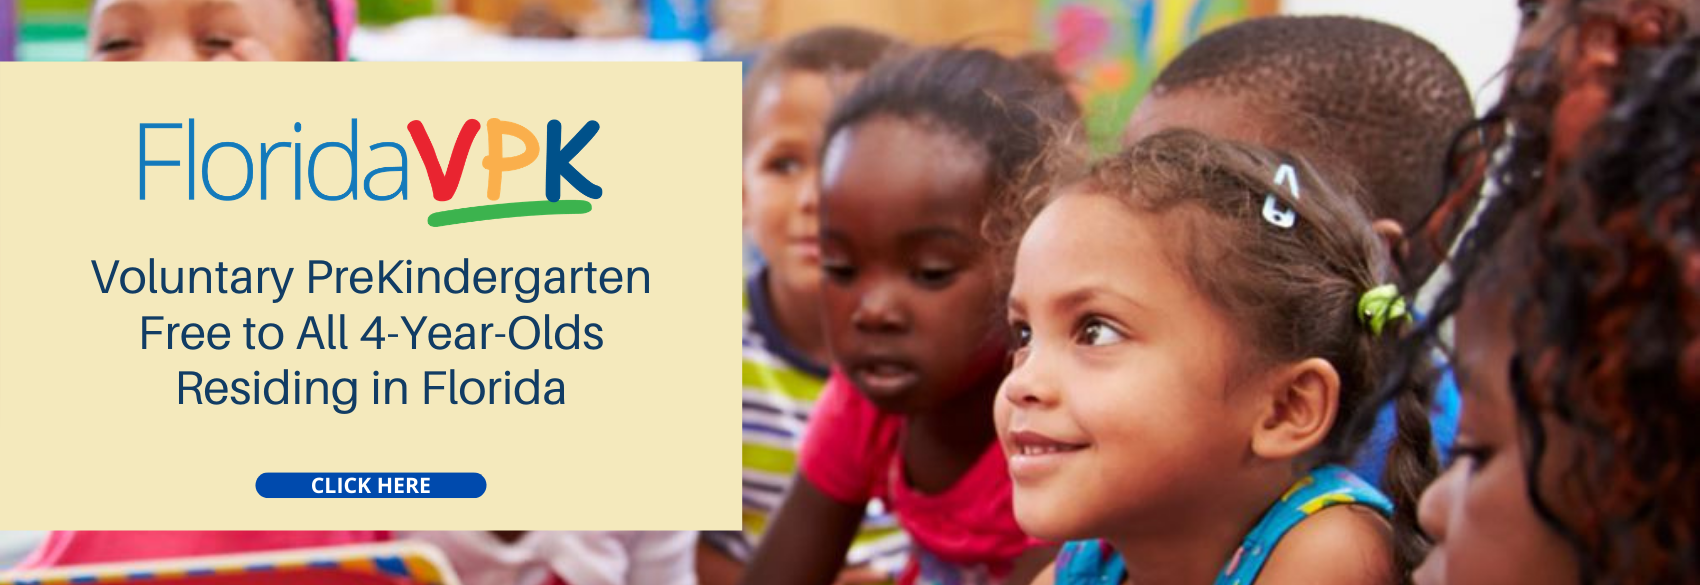 VPK free to all 4-year-olds residing in Florida.